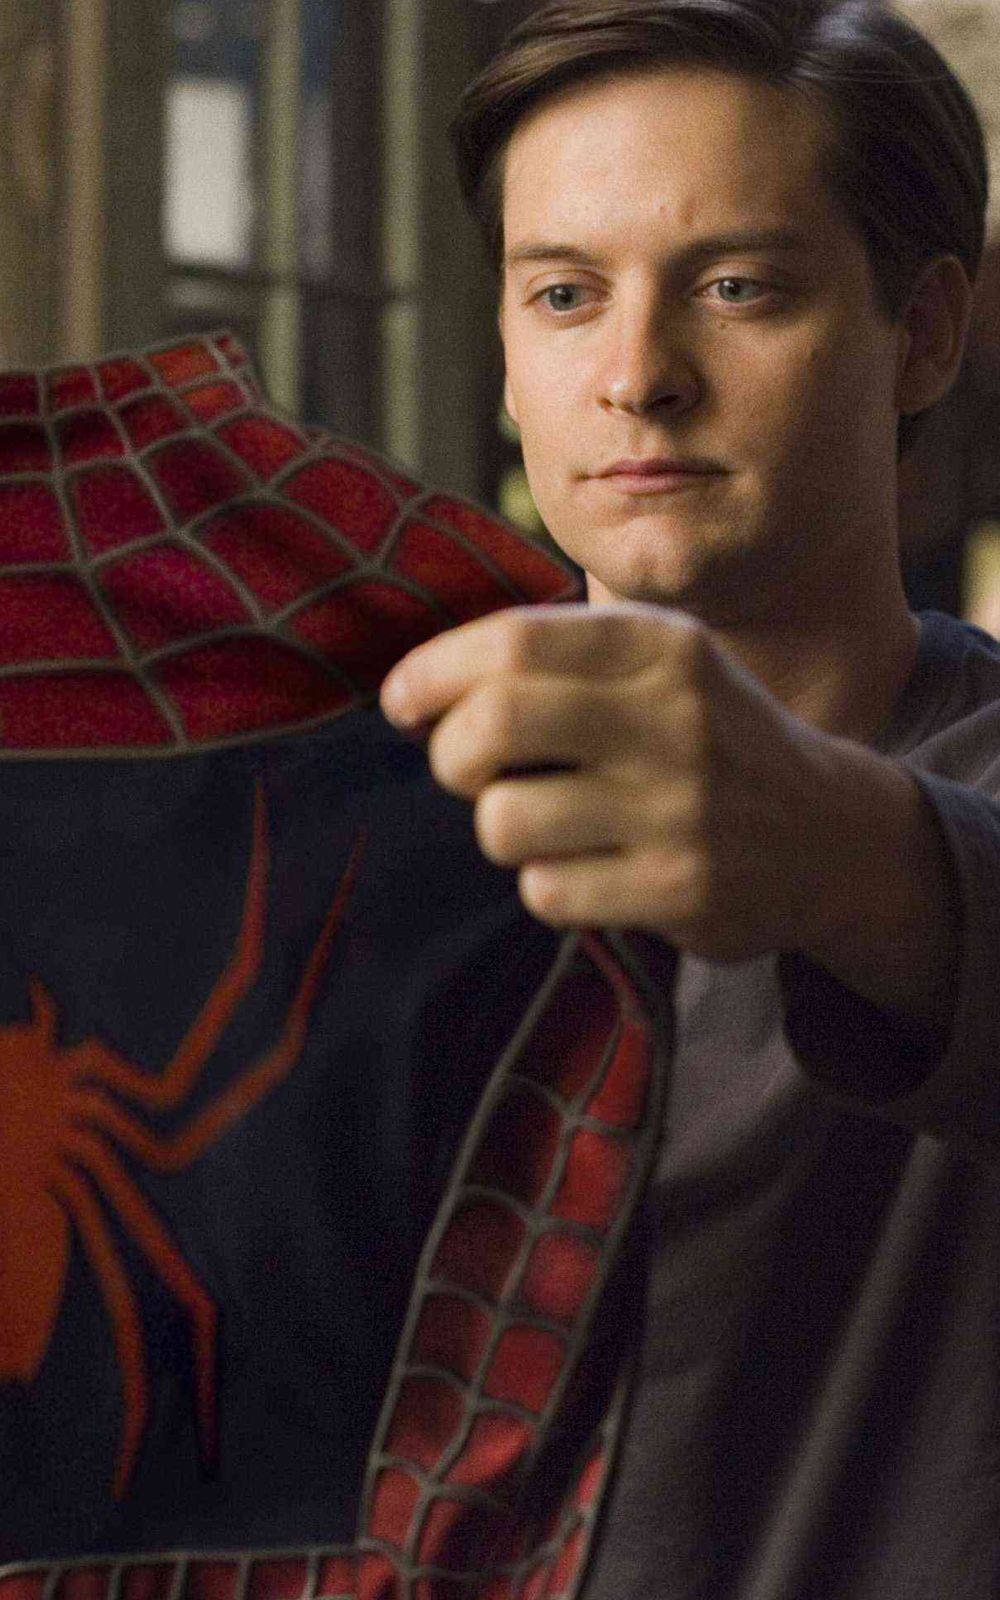 Tobey Magurie as Peter Parker 10-16